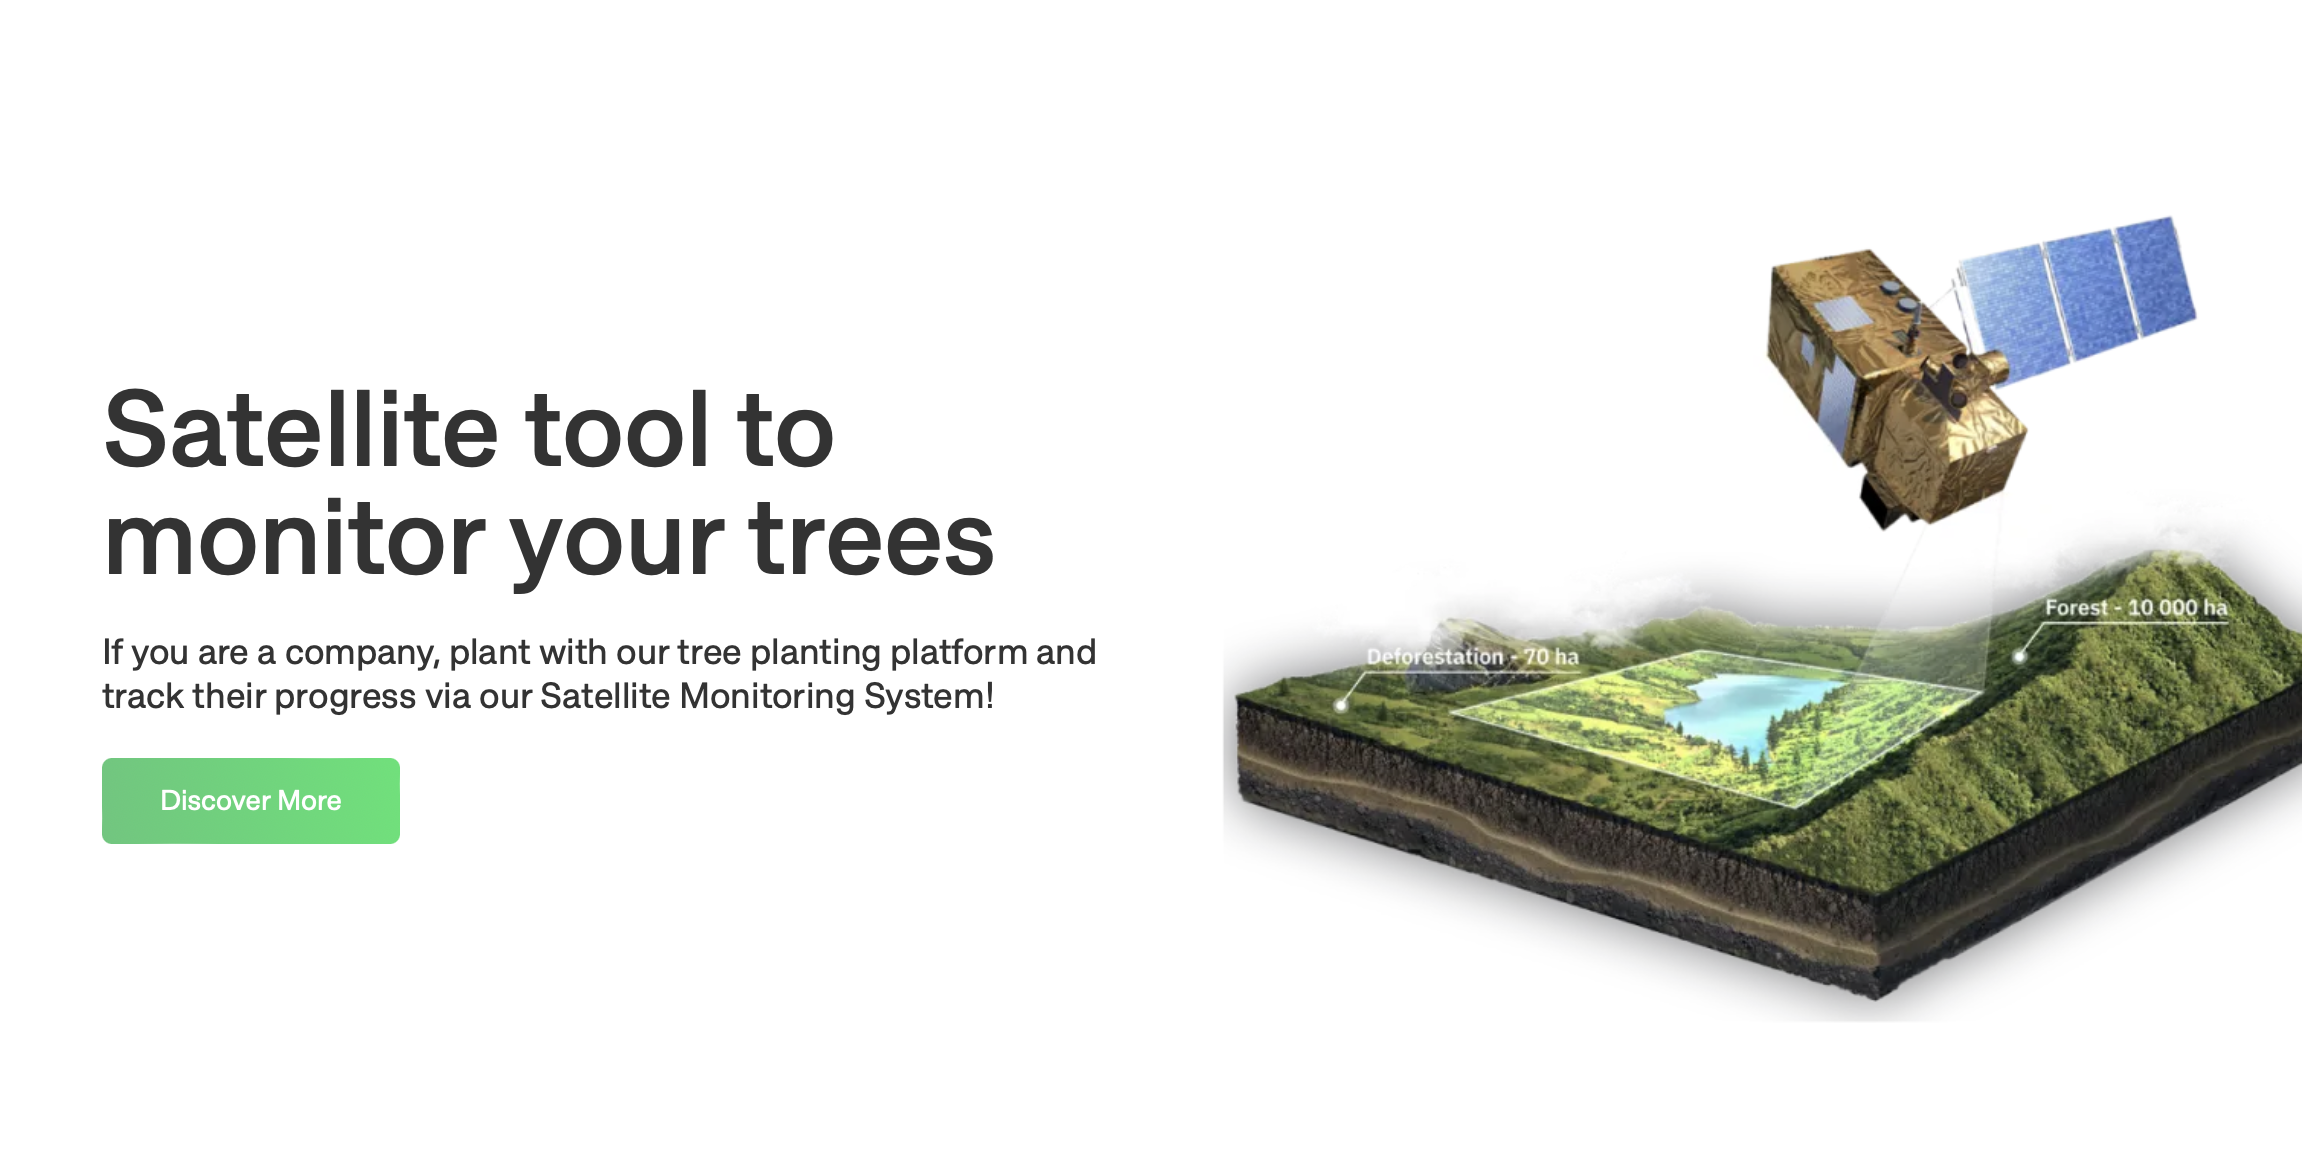 Satellite tool to monitor your trees